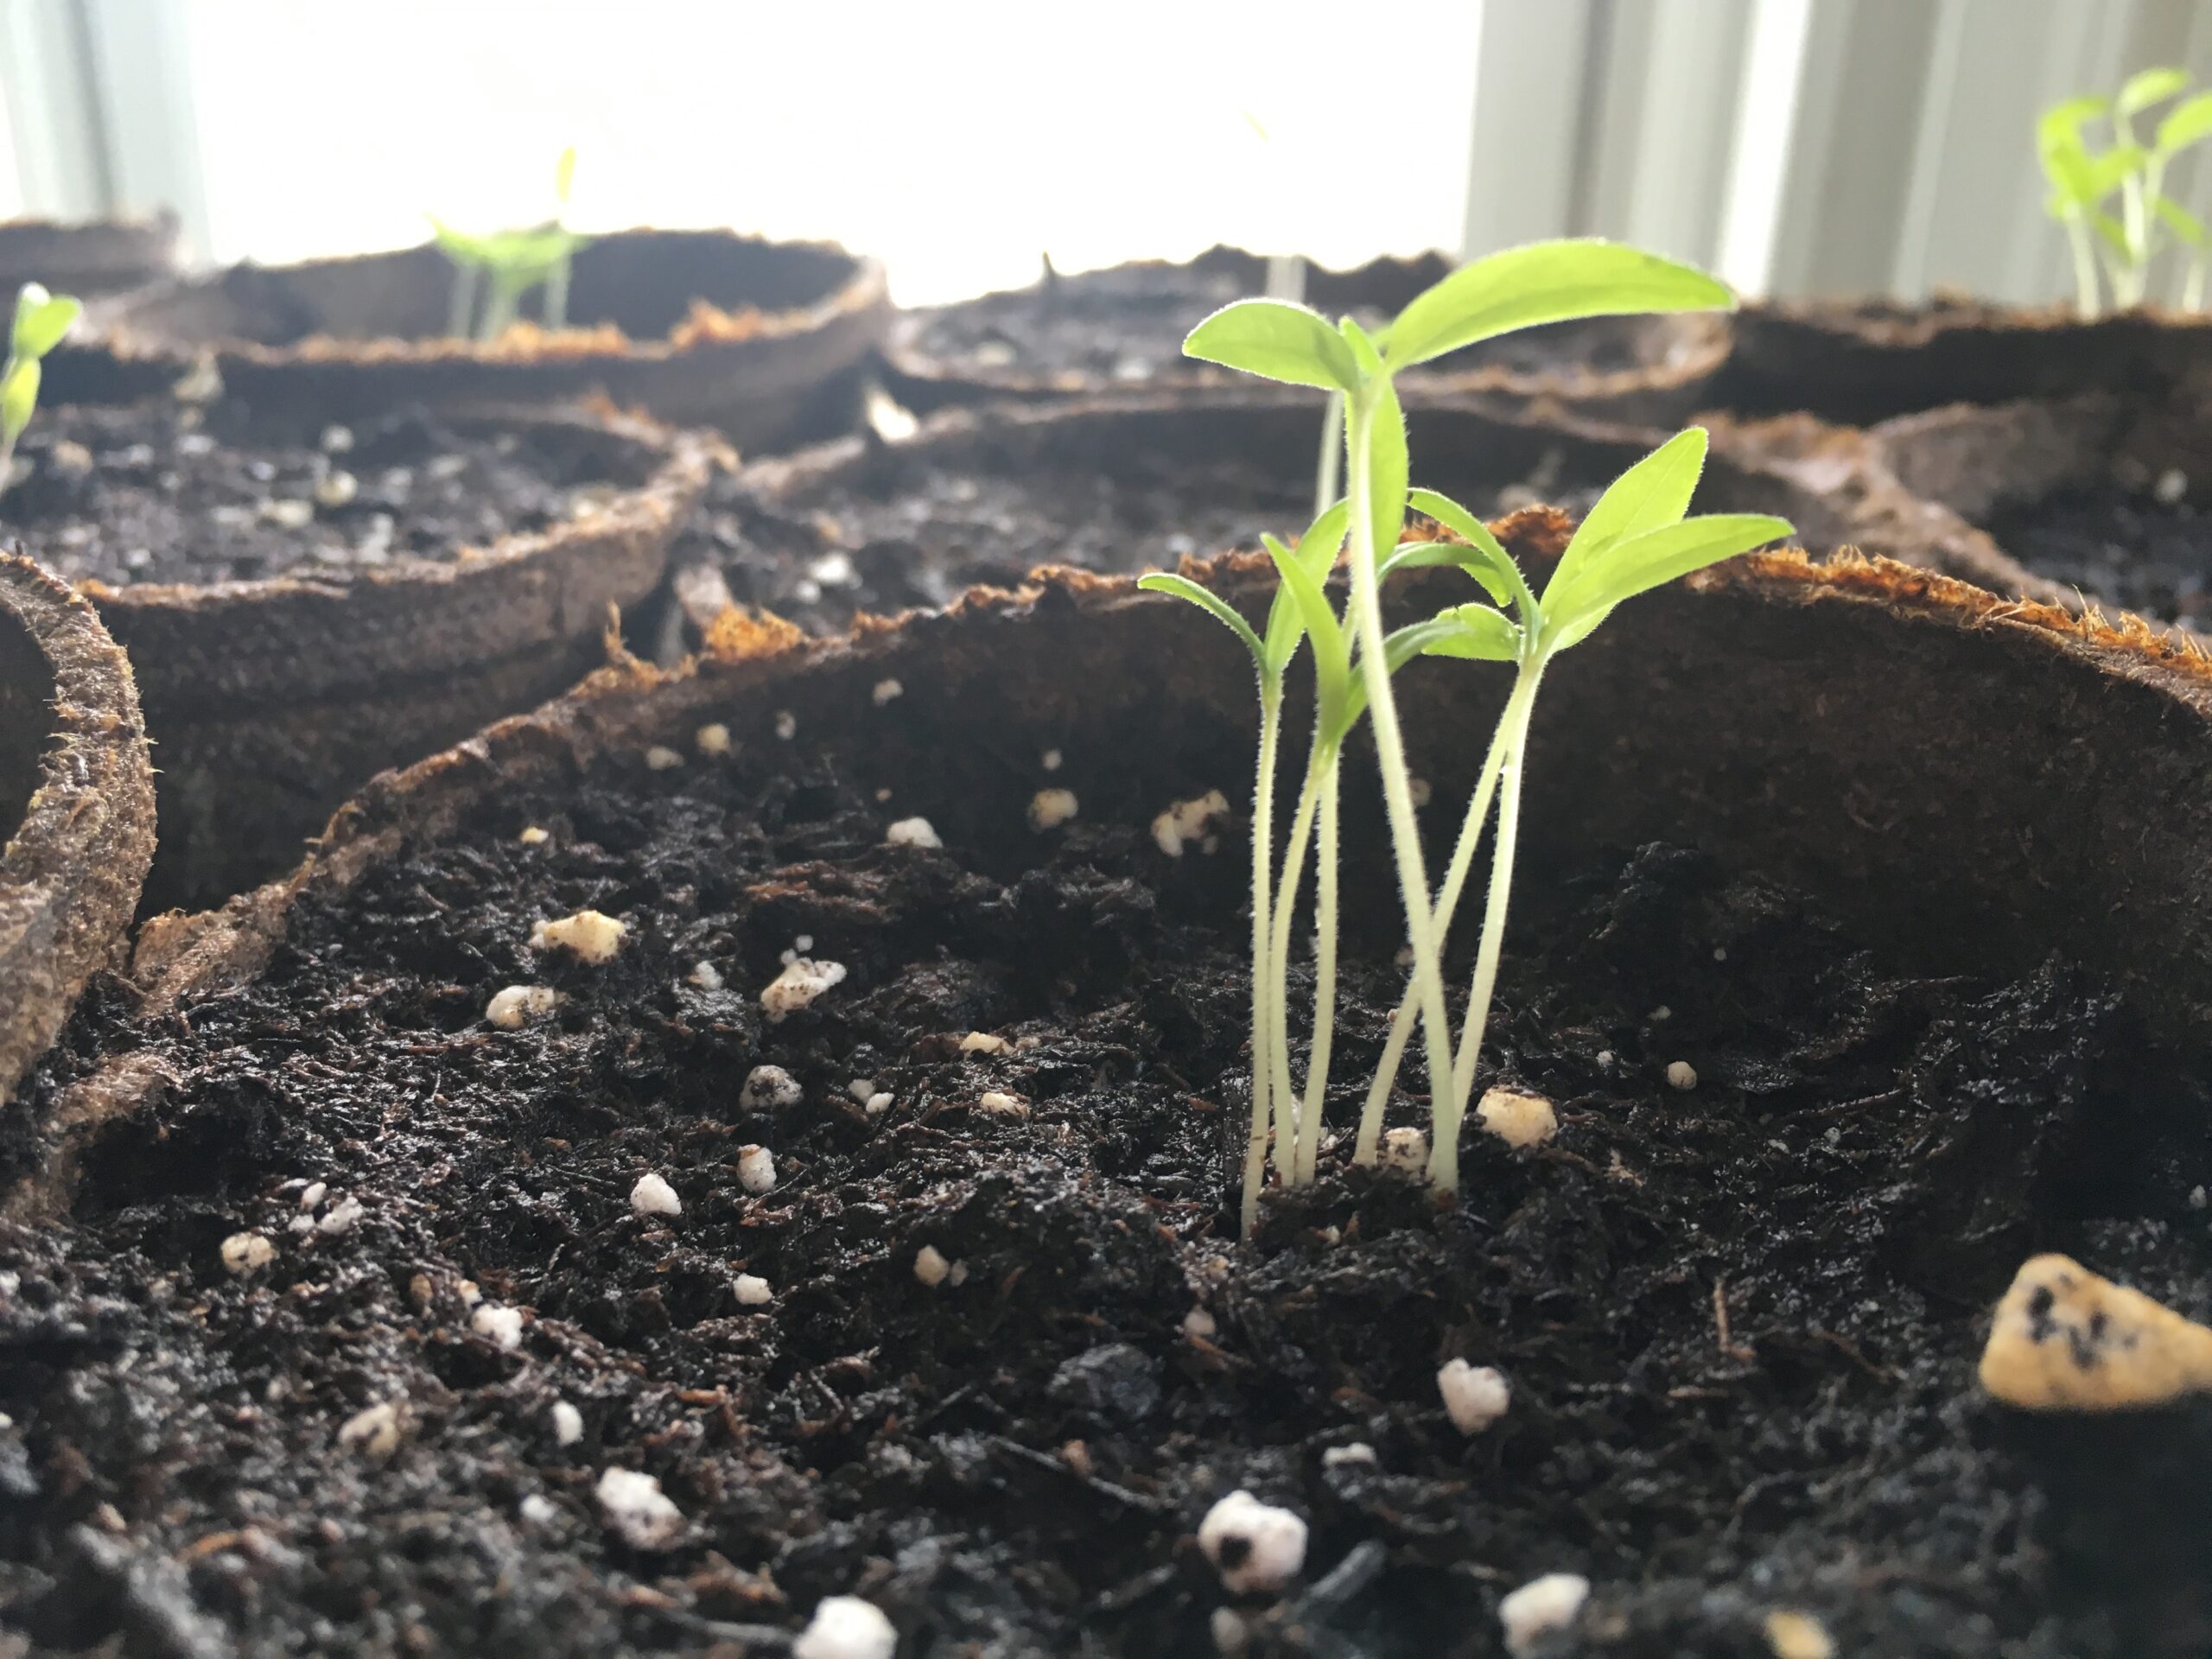 Why cucumber seedlings stretched out and what to do?